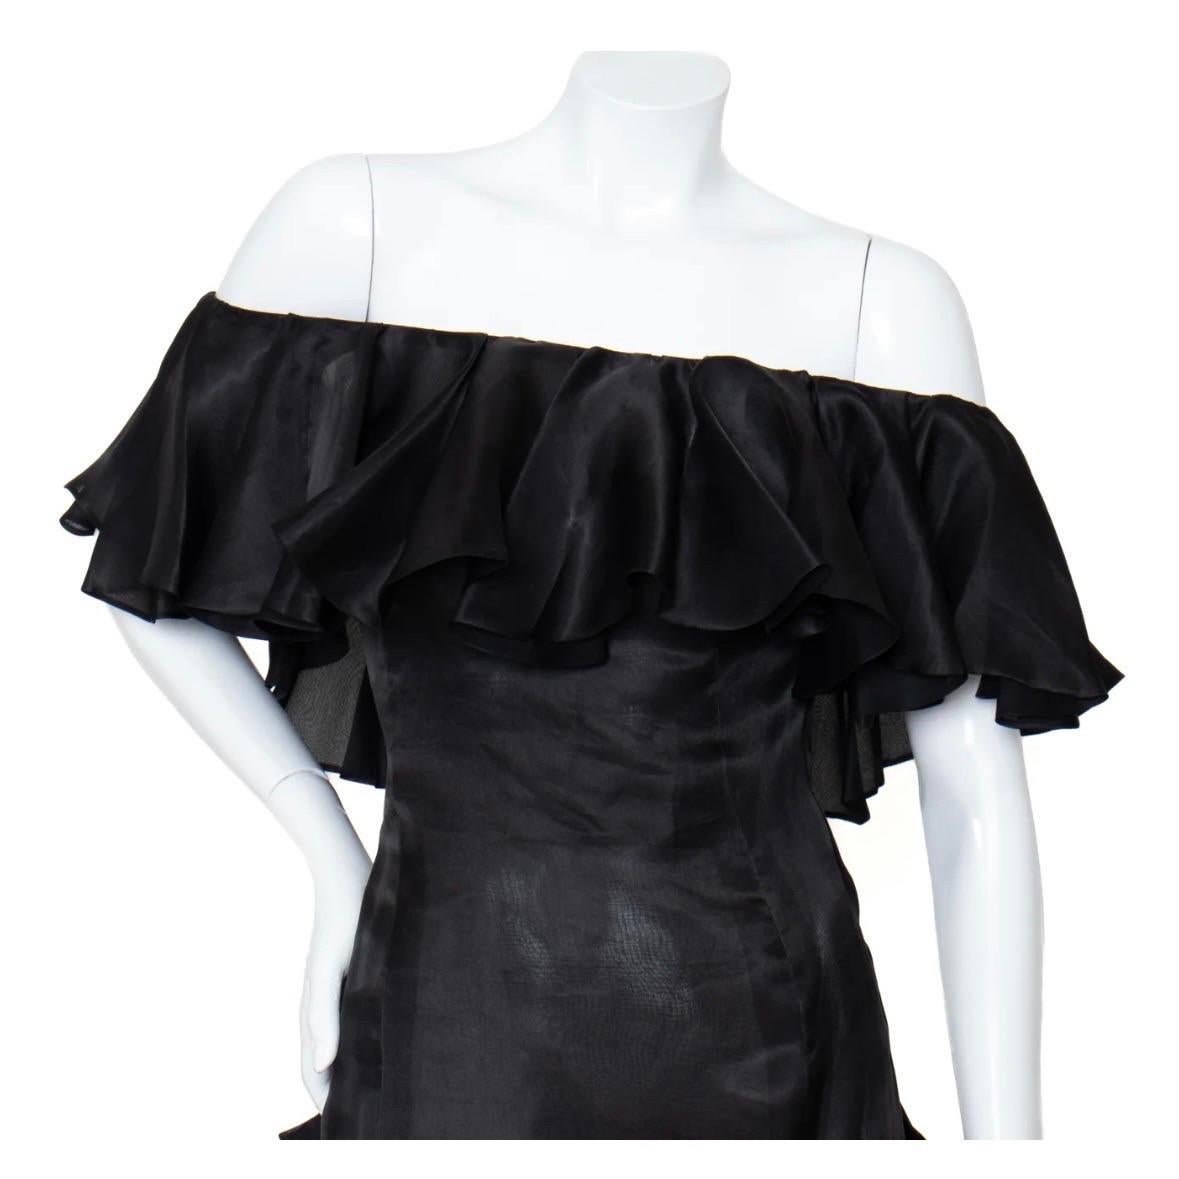 Yves Saint Laurent Haute Couture Ruffled Gown (1980s) For Sale 1